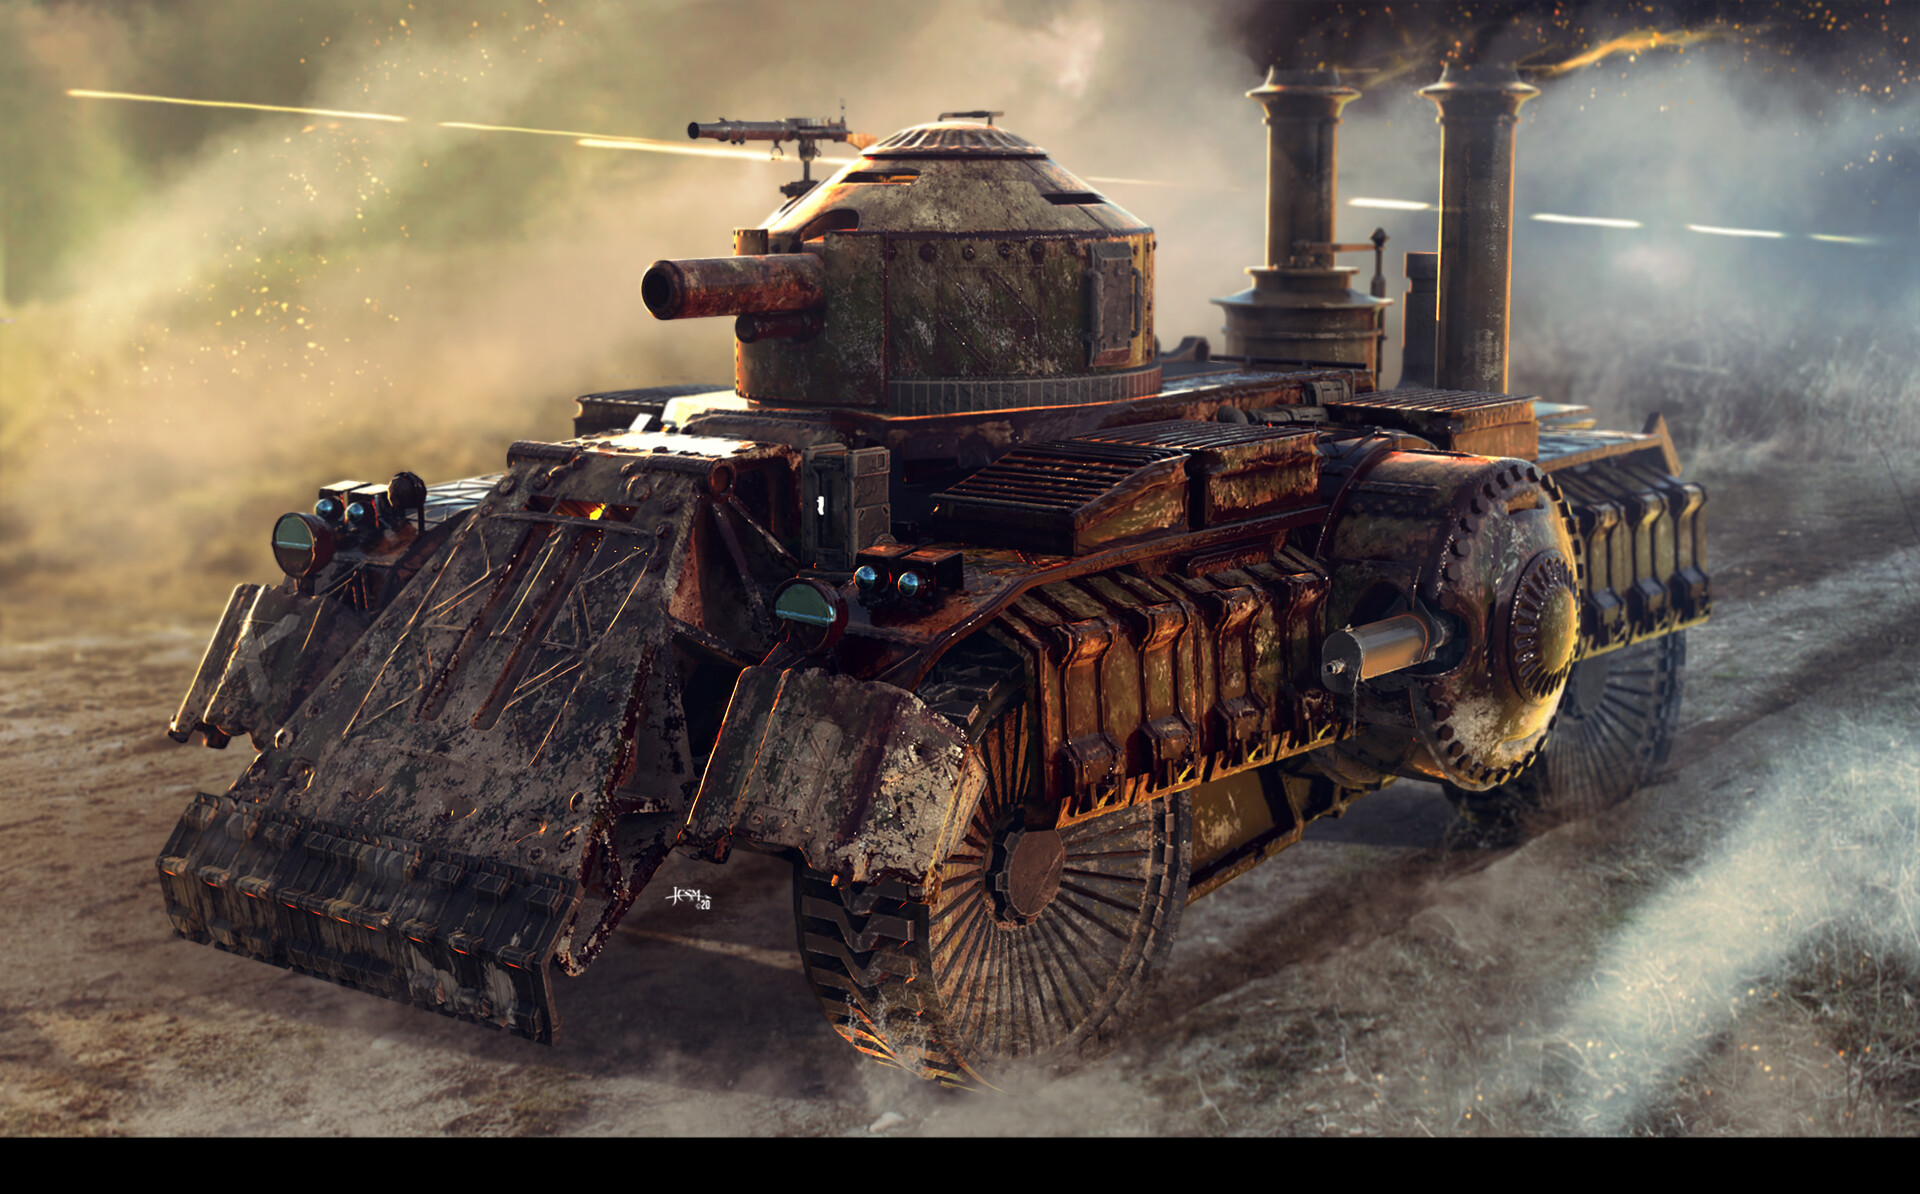 ArtStation - Steampunk tank and more!